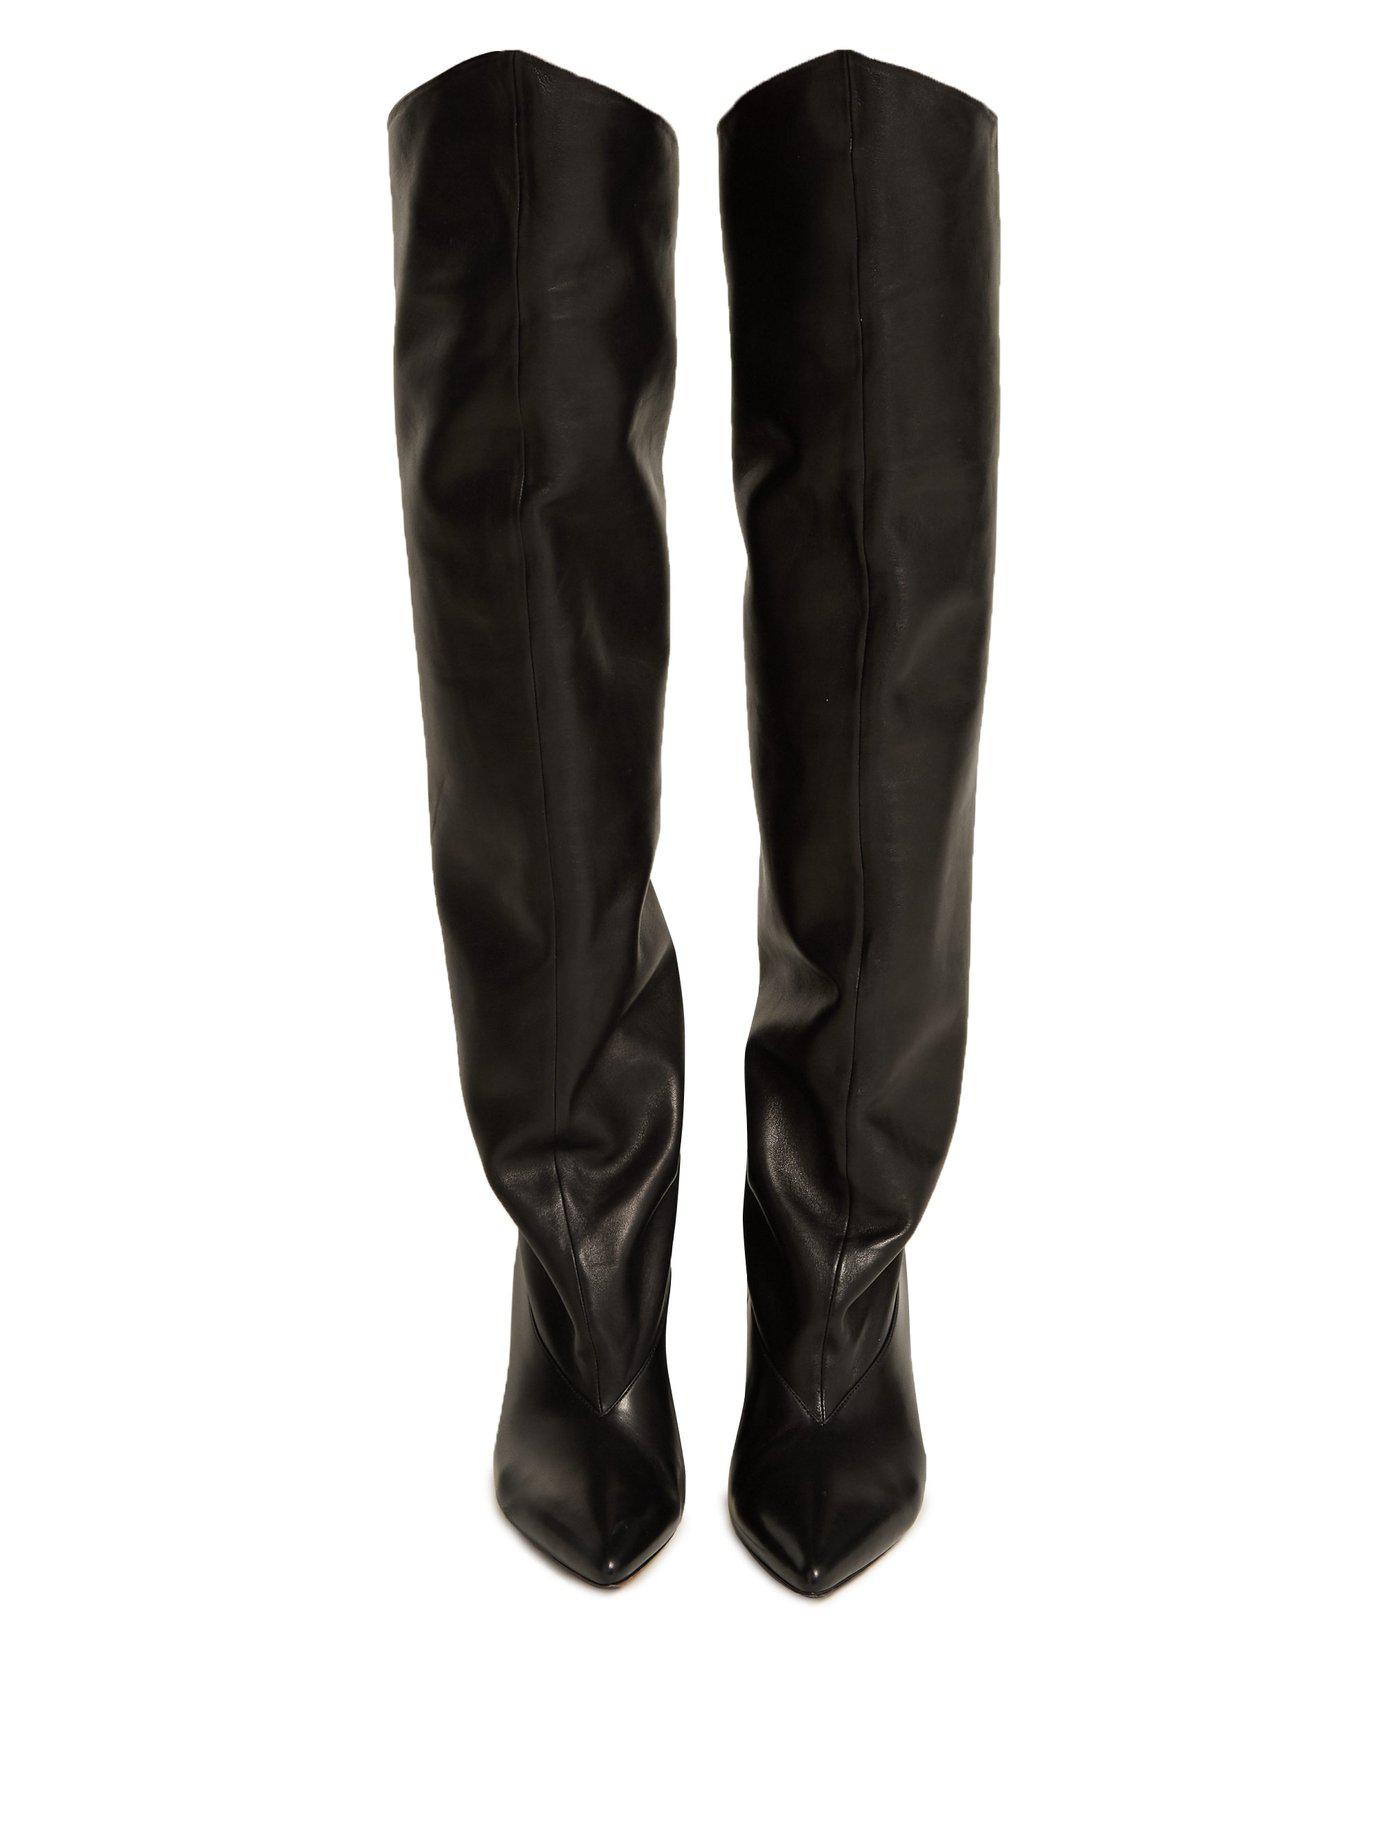 Givenchy Slouchy Knee High Leather Boots in Black - Lyst